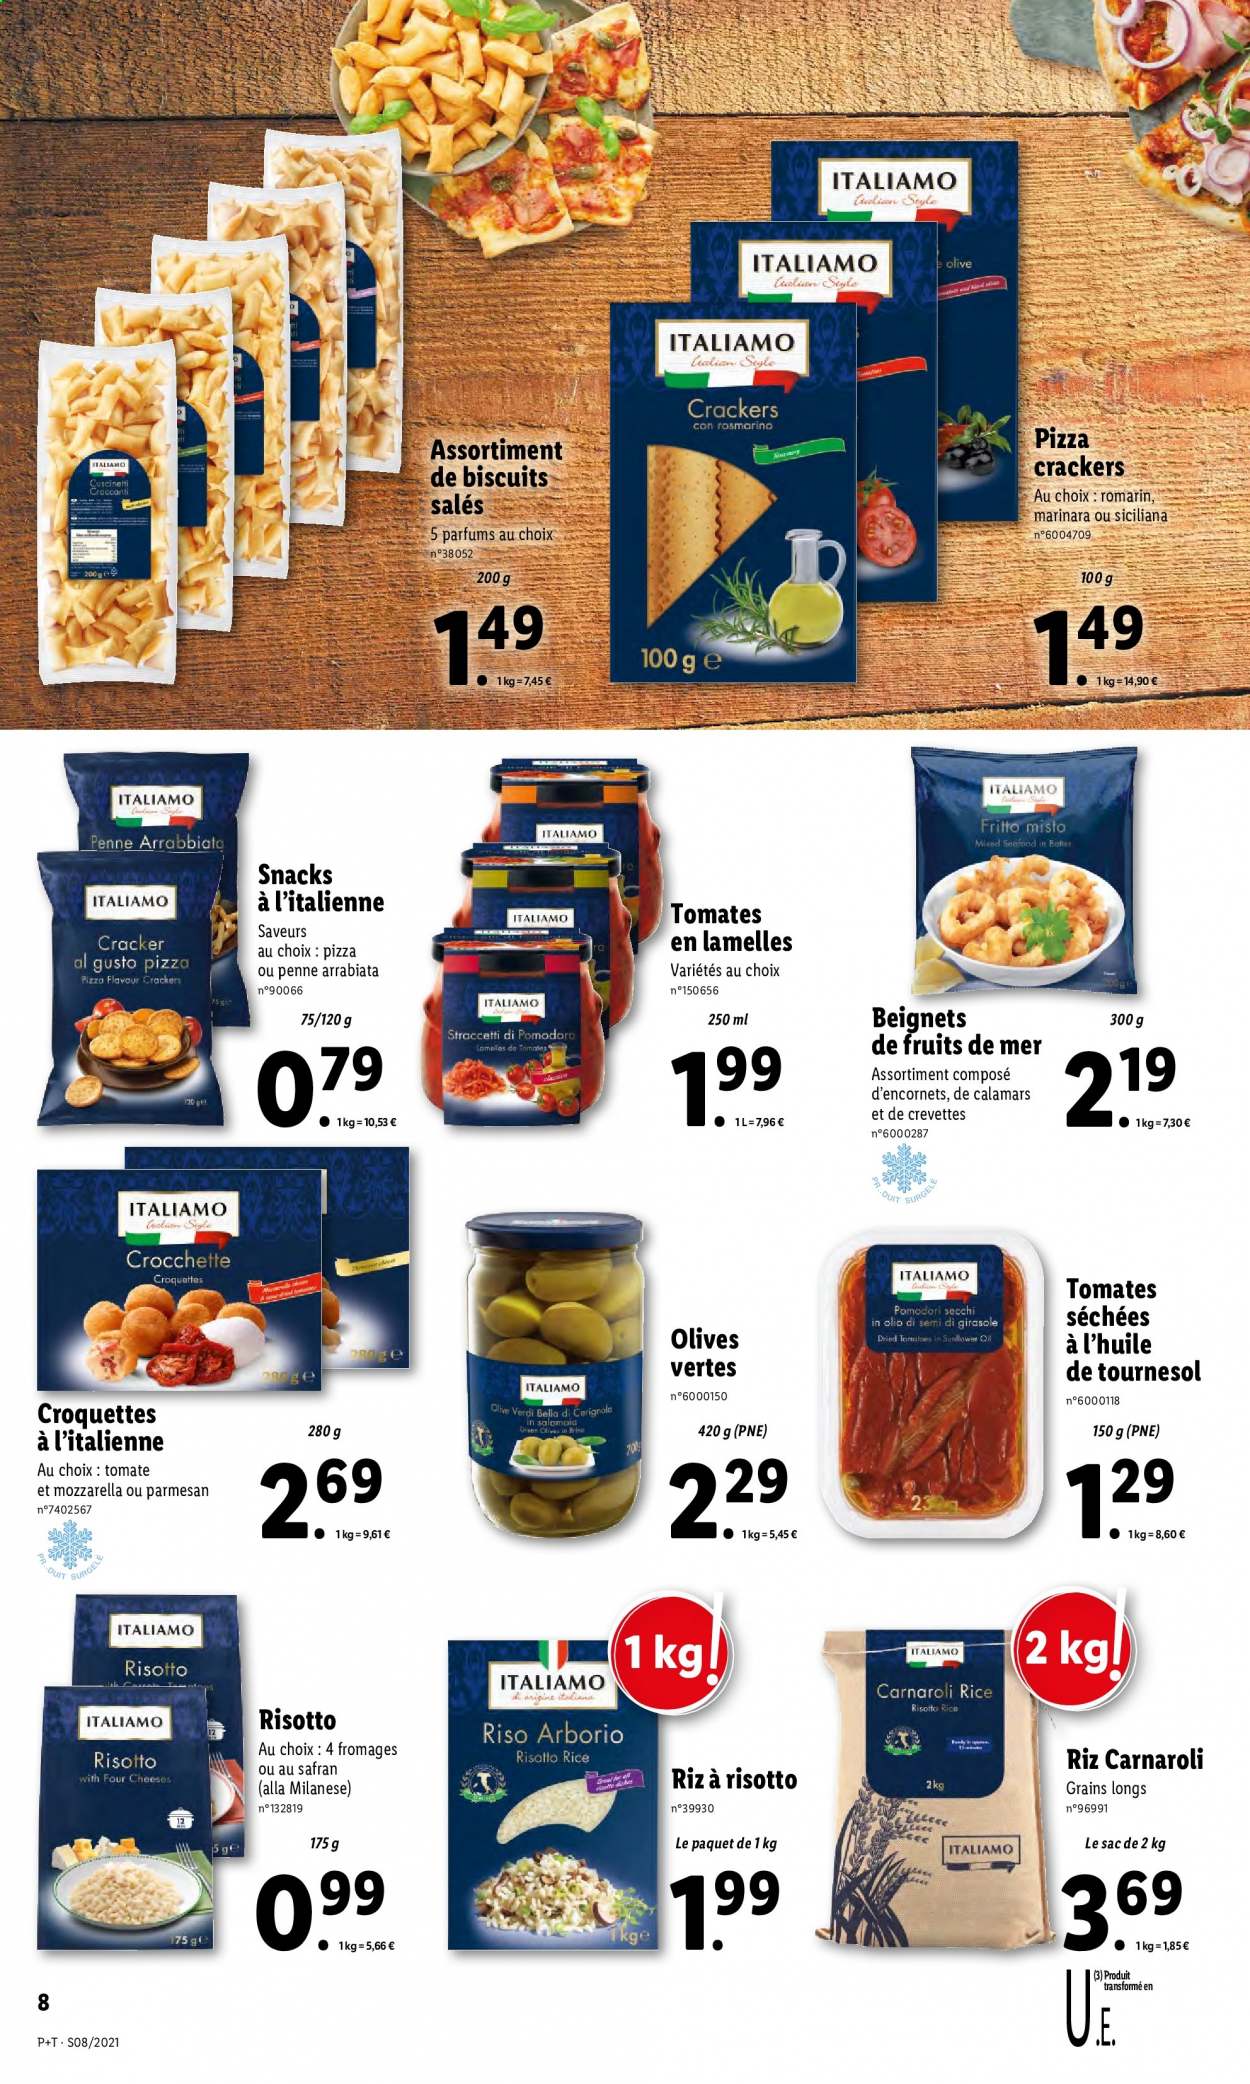 Catalogue Lidl - 24.02.2021 - 02.03.2021. Page 8.